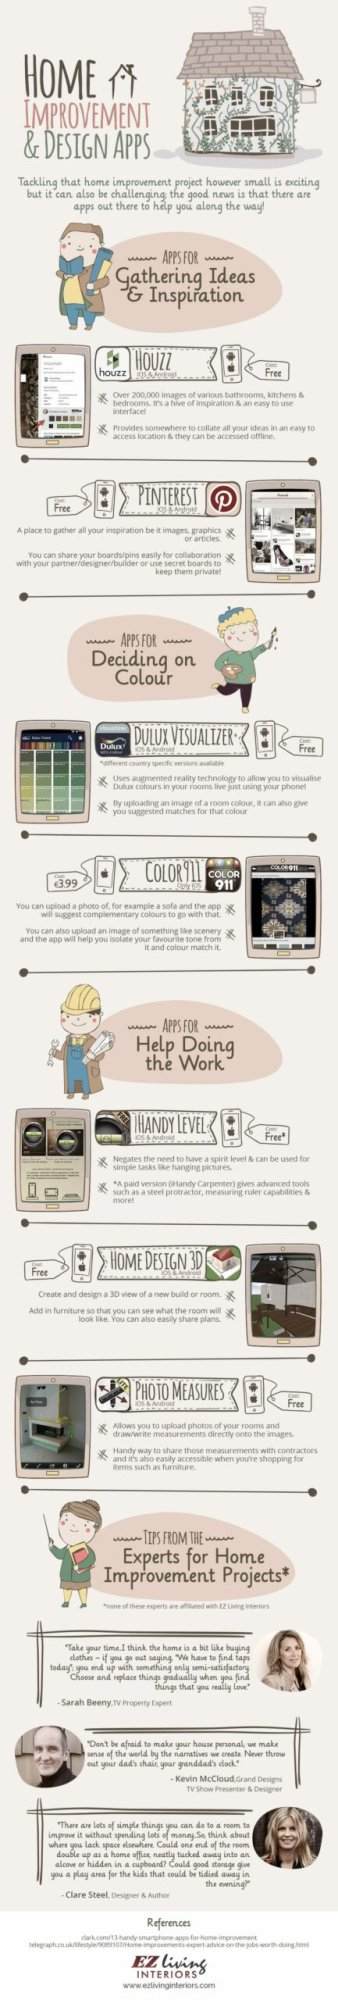 Home Improvement Apps - Infographic - Do It Yourself Apps home improvement apps